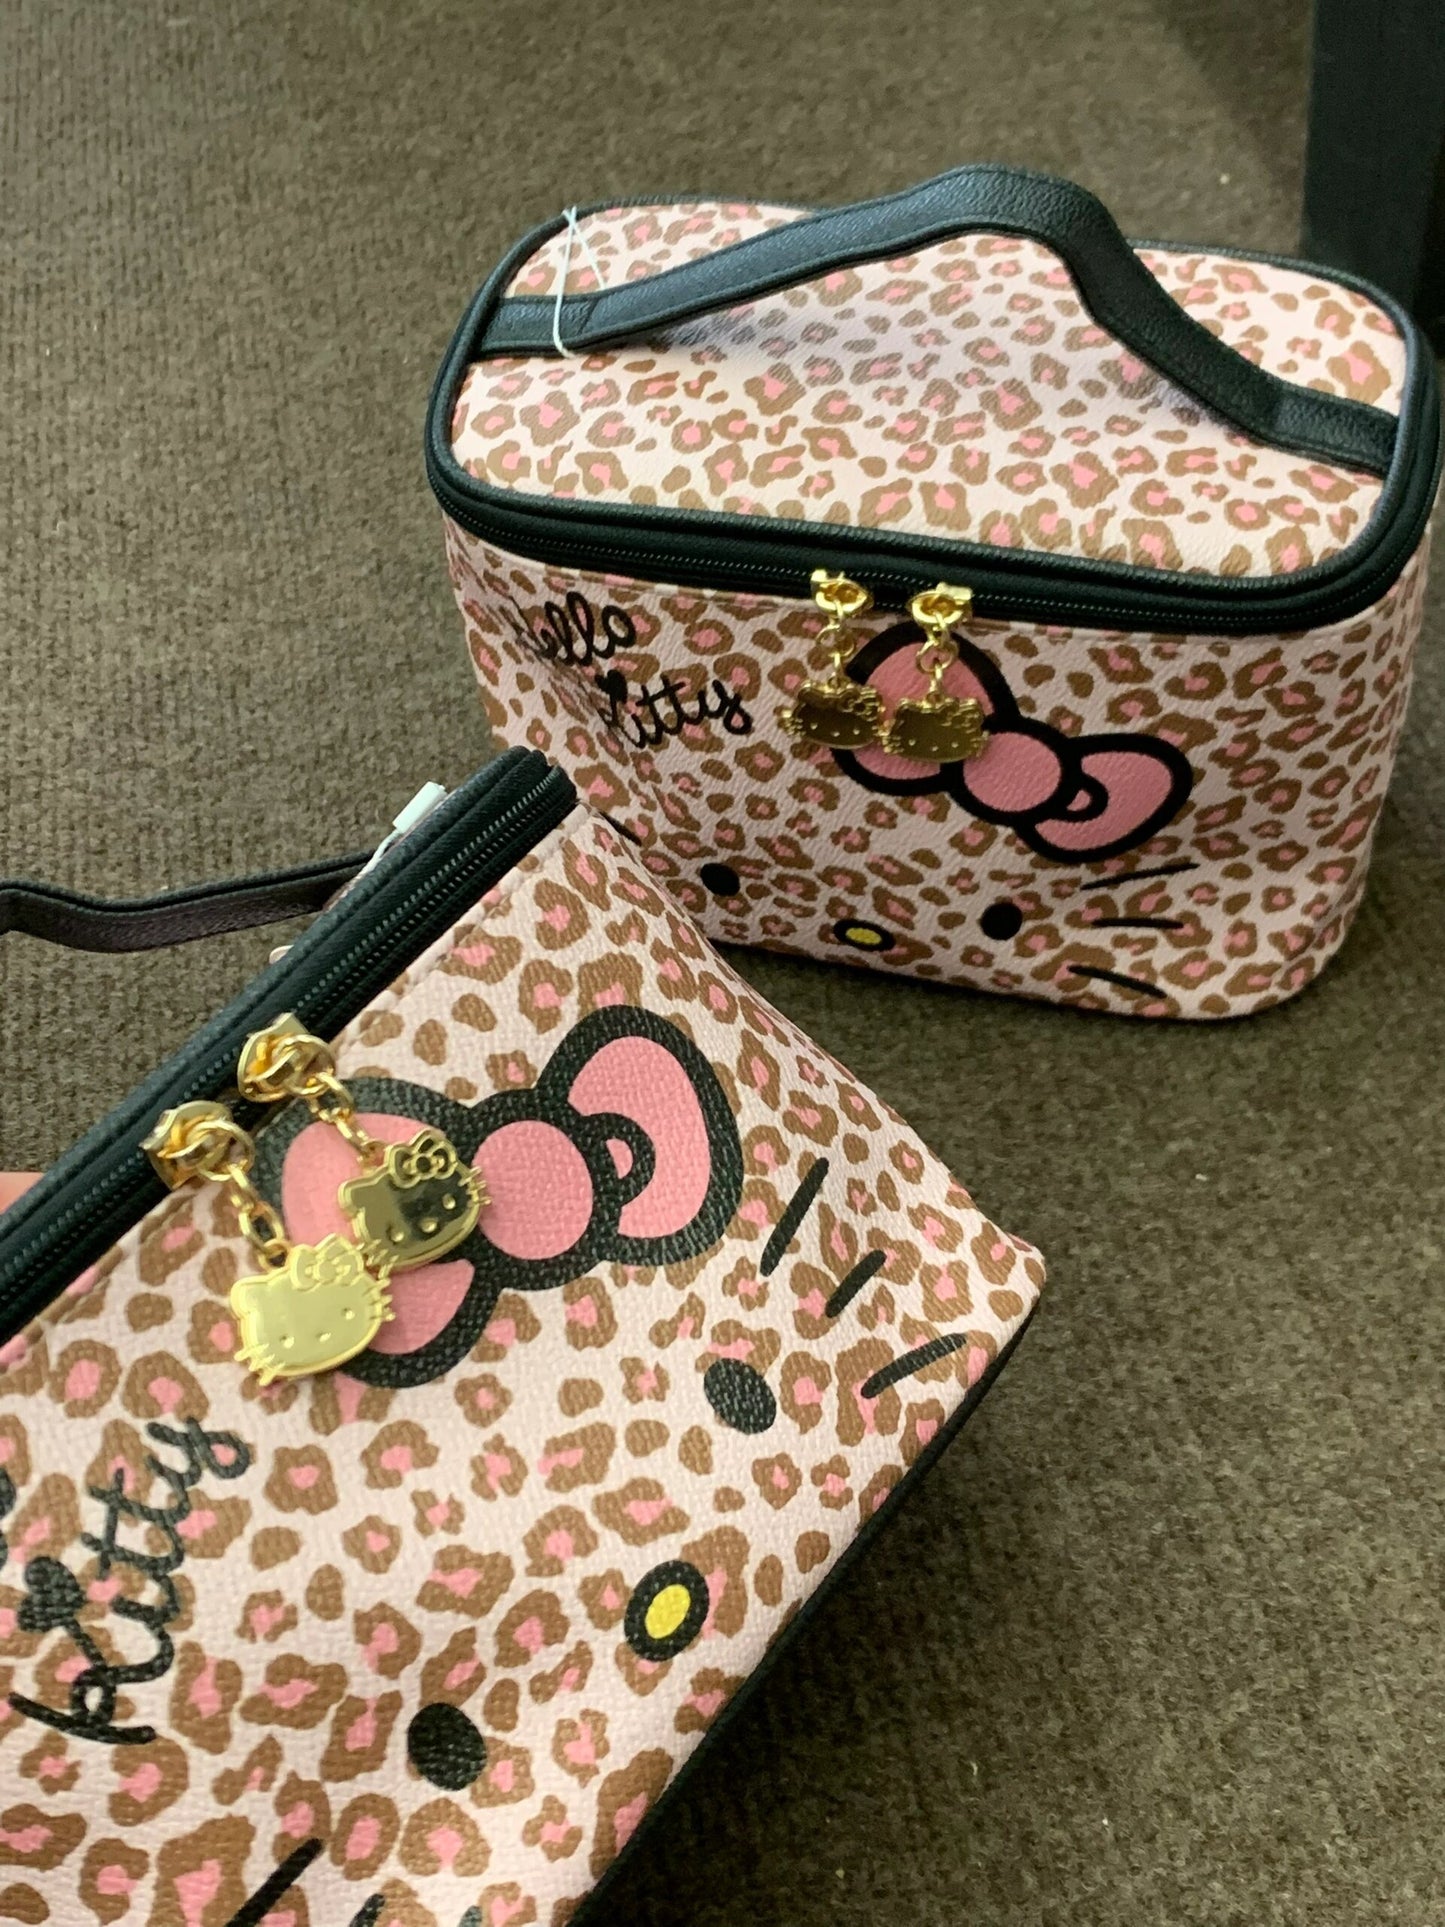 Hellokitty Leopard-print Travel Makeup Portable Storage Bag | Dividers for Cosmetics Makeup Brushes Toiletry Jewelry Digital Accessories